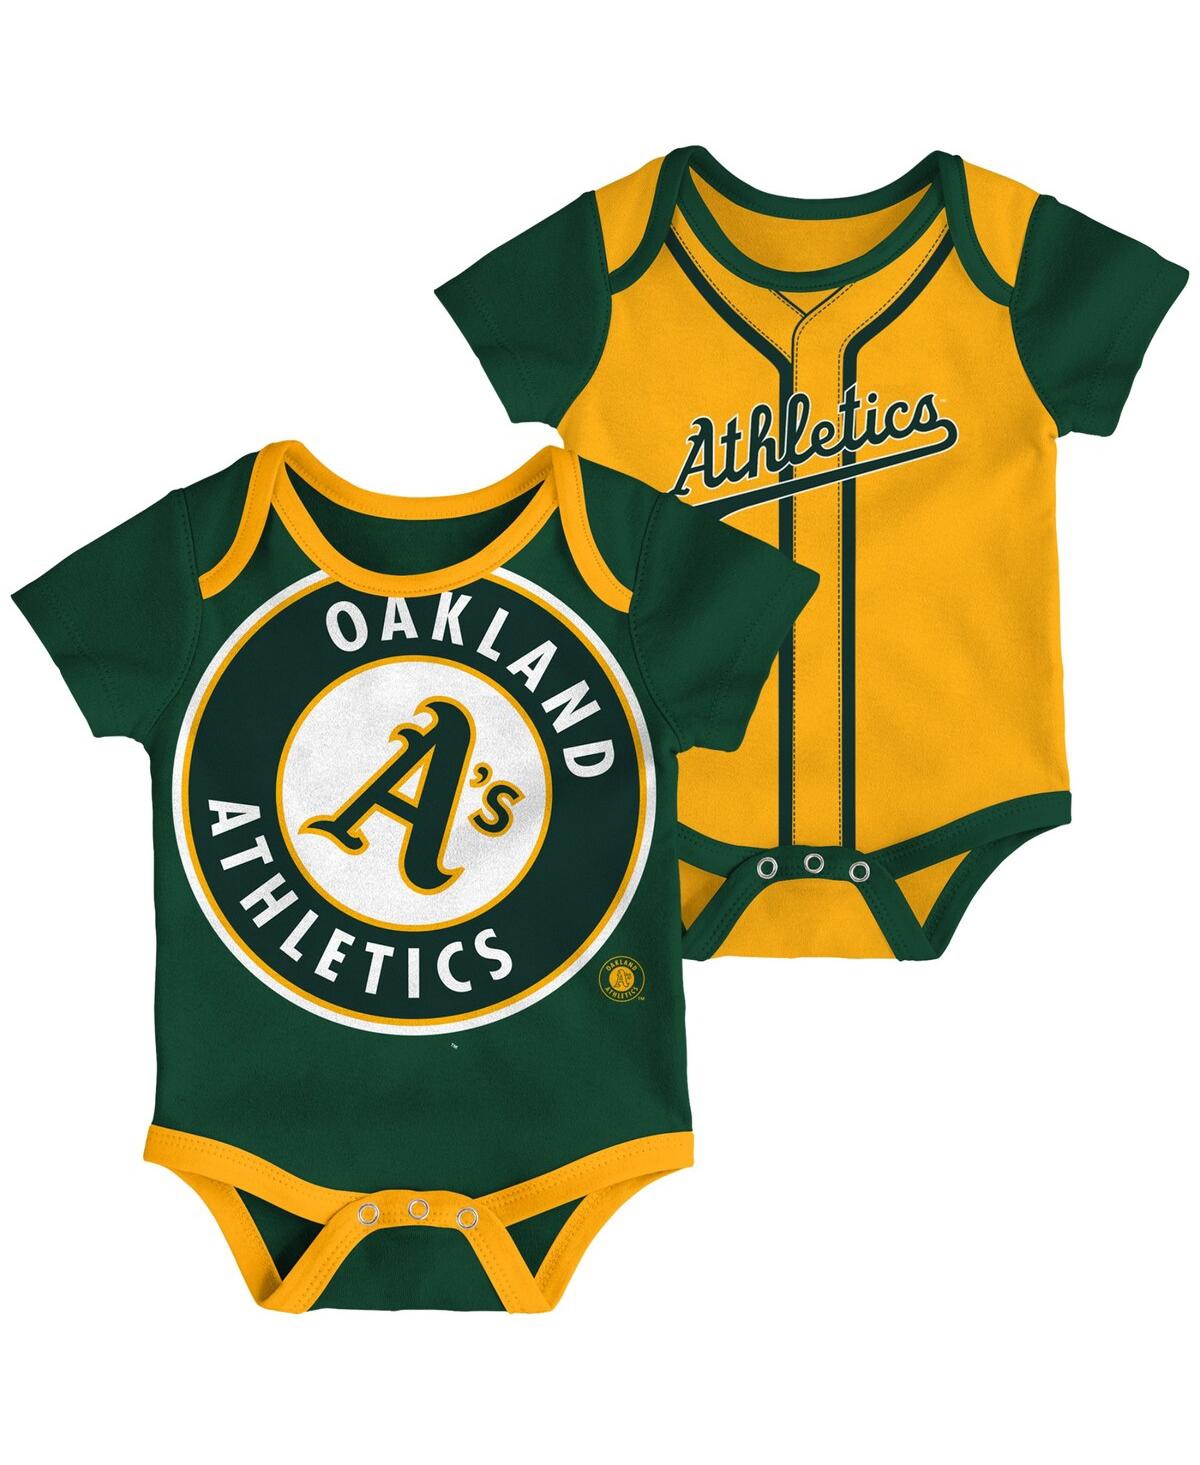 Outerstuff Babies' Infant Boys And Girls Boys And Girls Green, Gold Oakland Athletics Double 2-pack Bodysuit Set In Green,gold